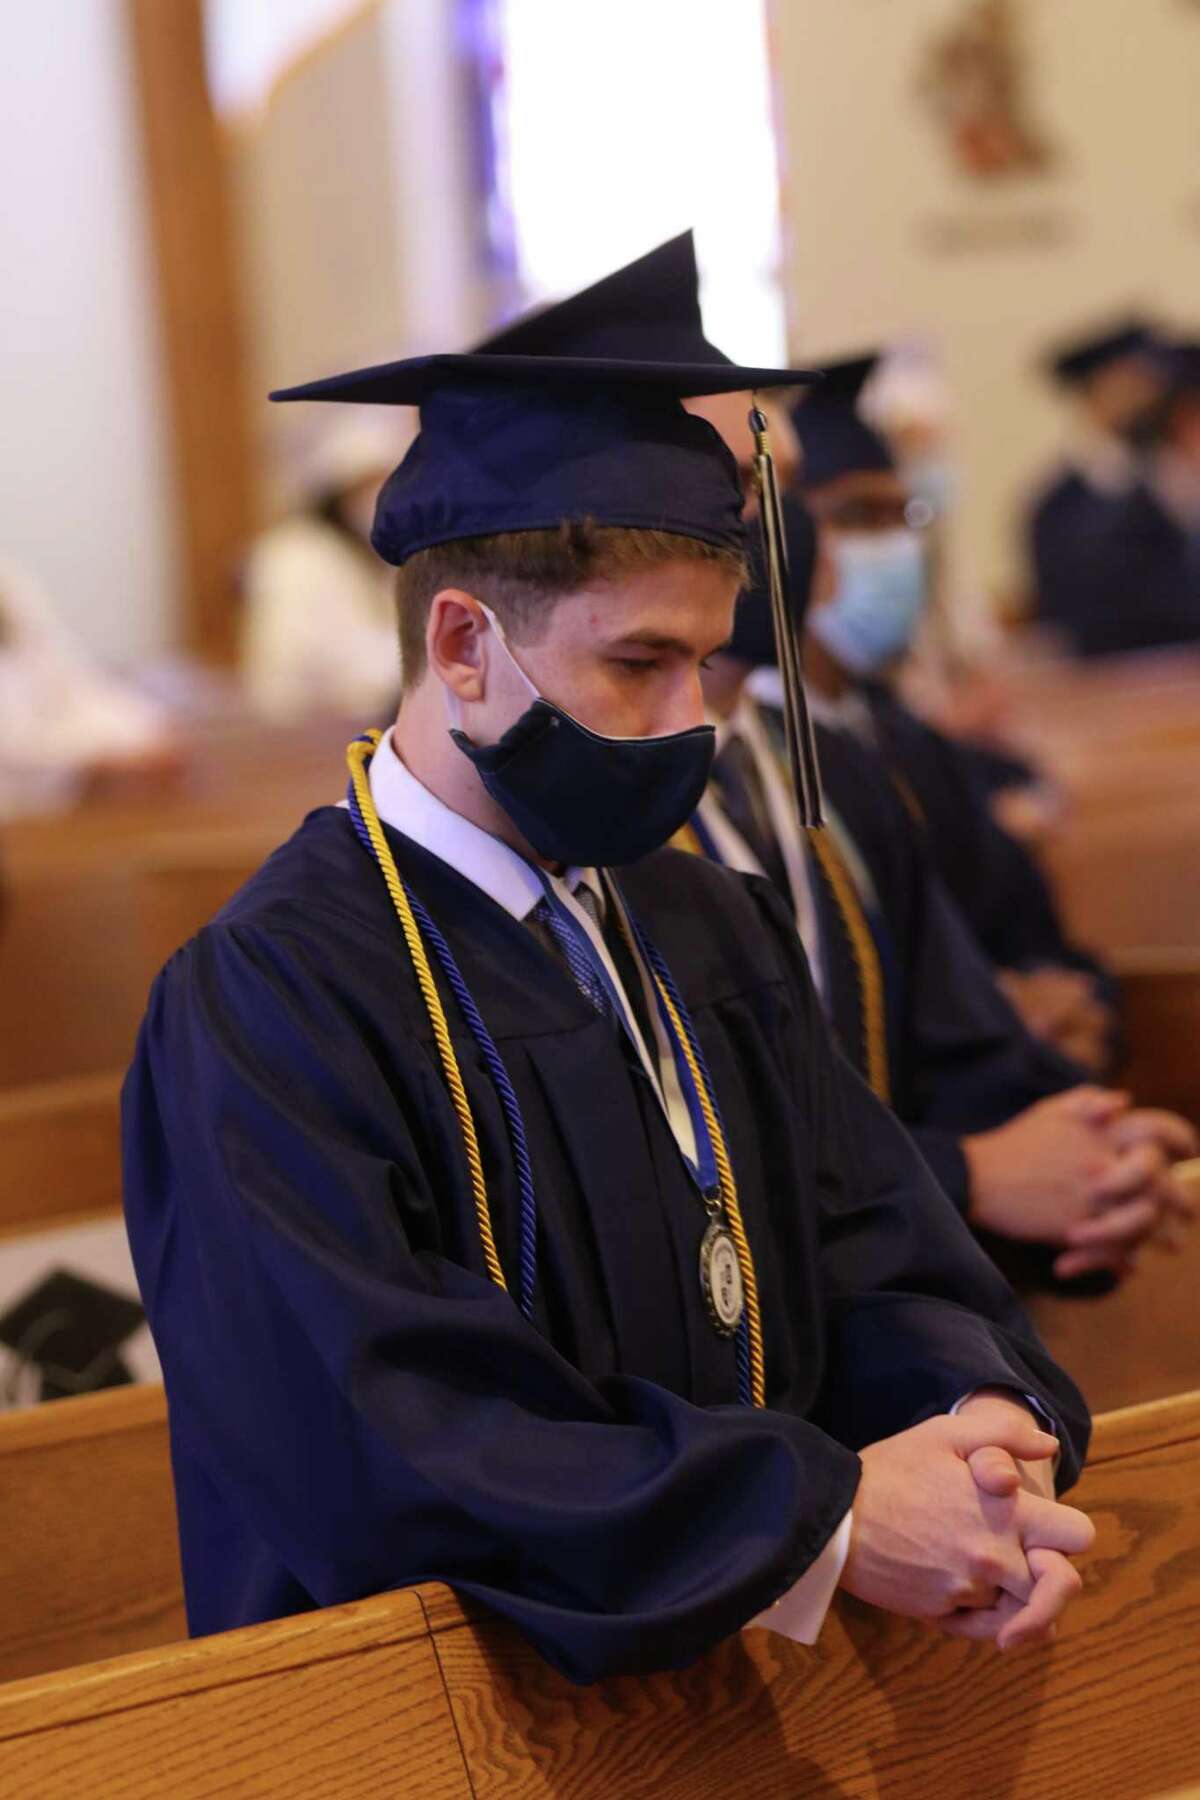 Tristan DiNatale, of Sherman, praying at the IHS Commencement Liturgy on Saturday, June 13 at St Rose of Lima Church in Newtown.